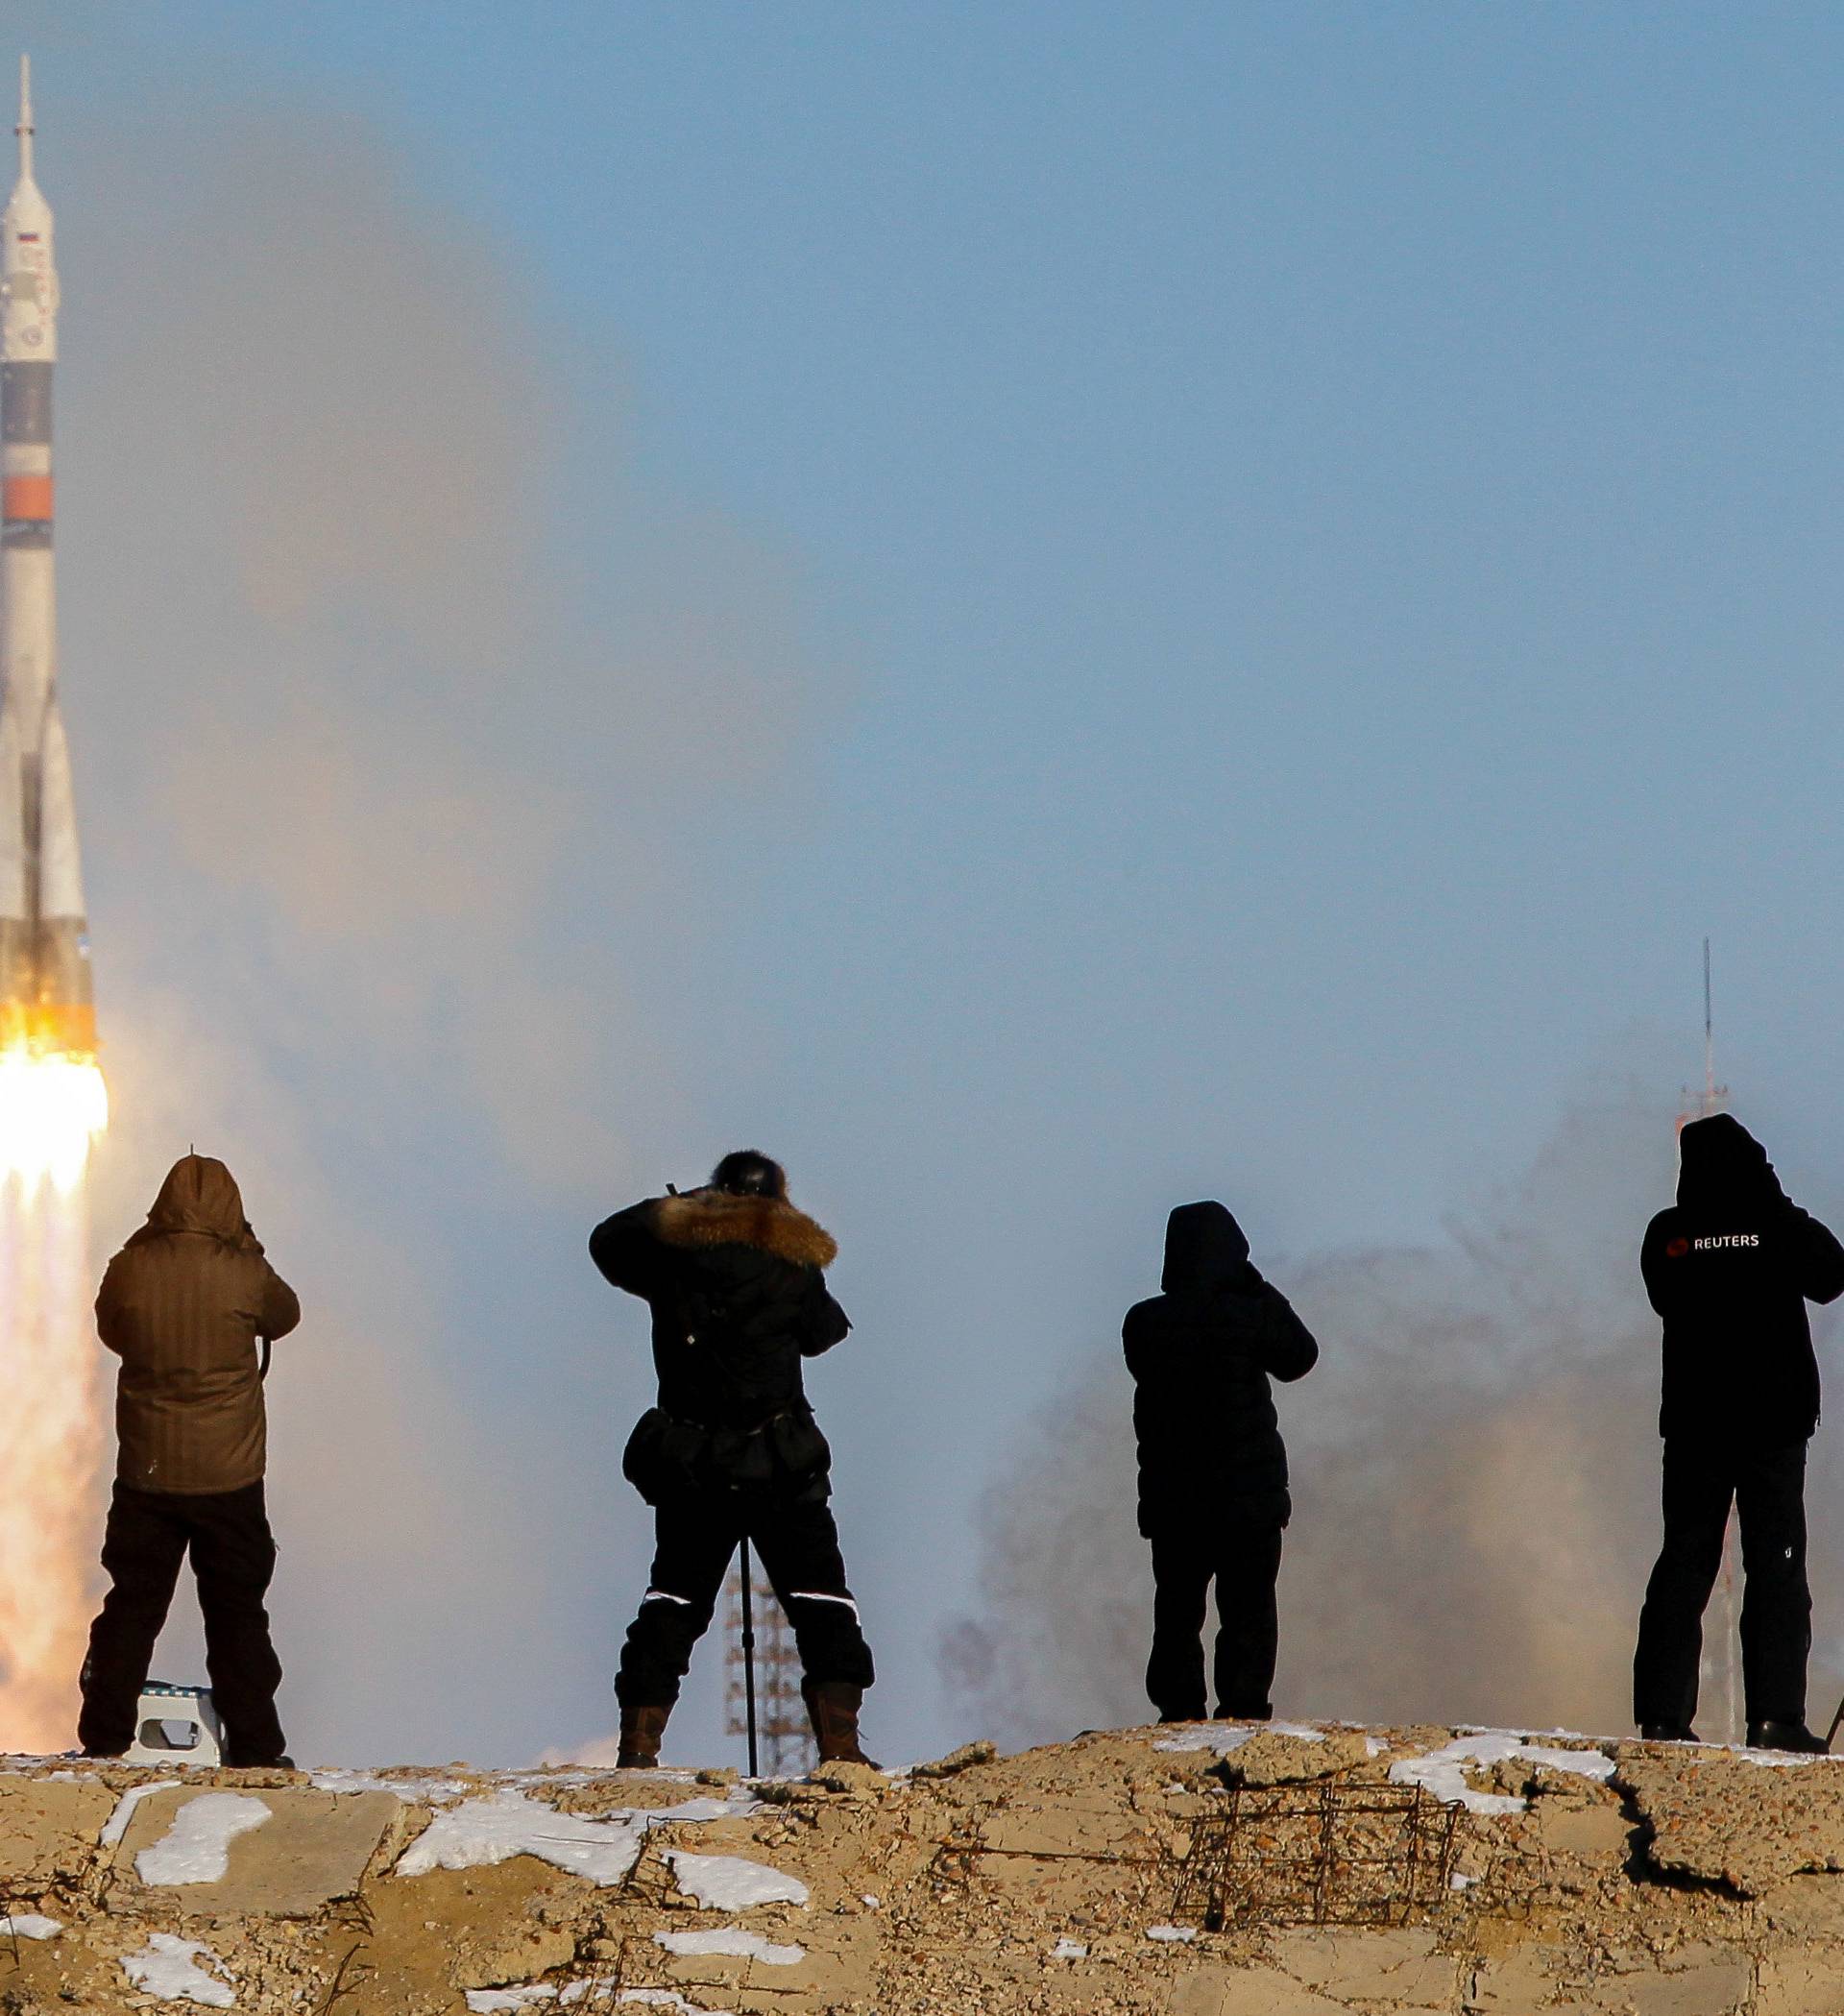 Photographers take pictures as the Soyuz MS-07 spacecraft carrying the next International Space Station (ISS) crew blasts off from the launchpad at the Baikonur Cosmodrome